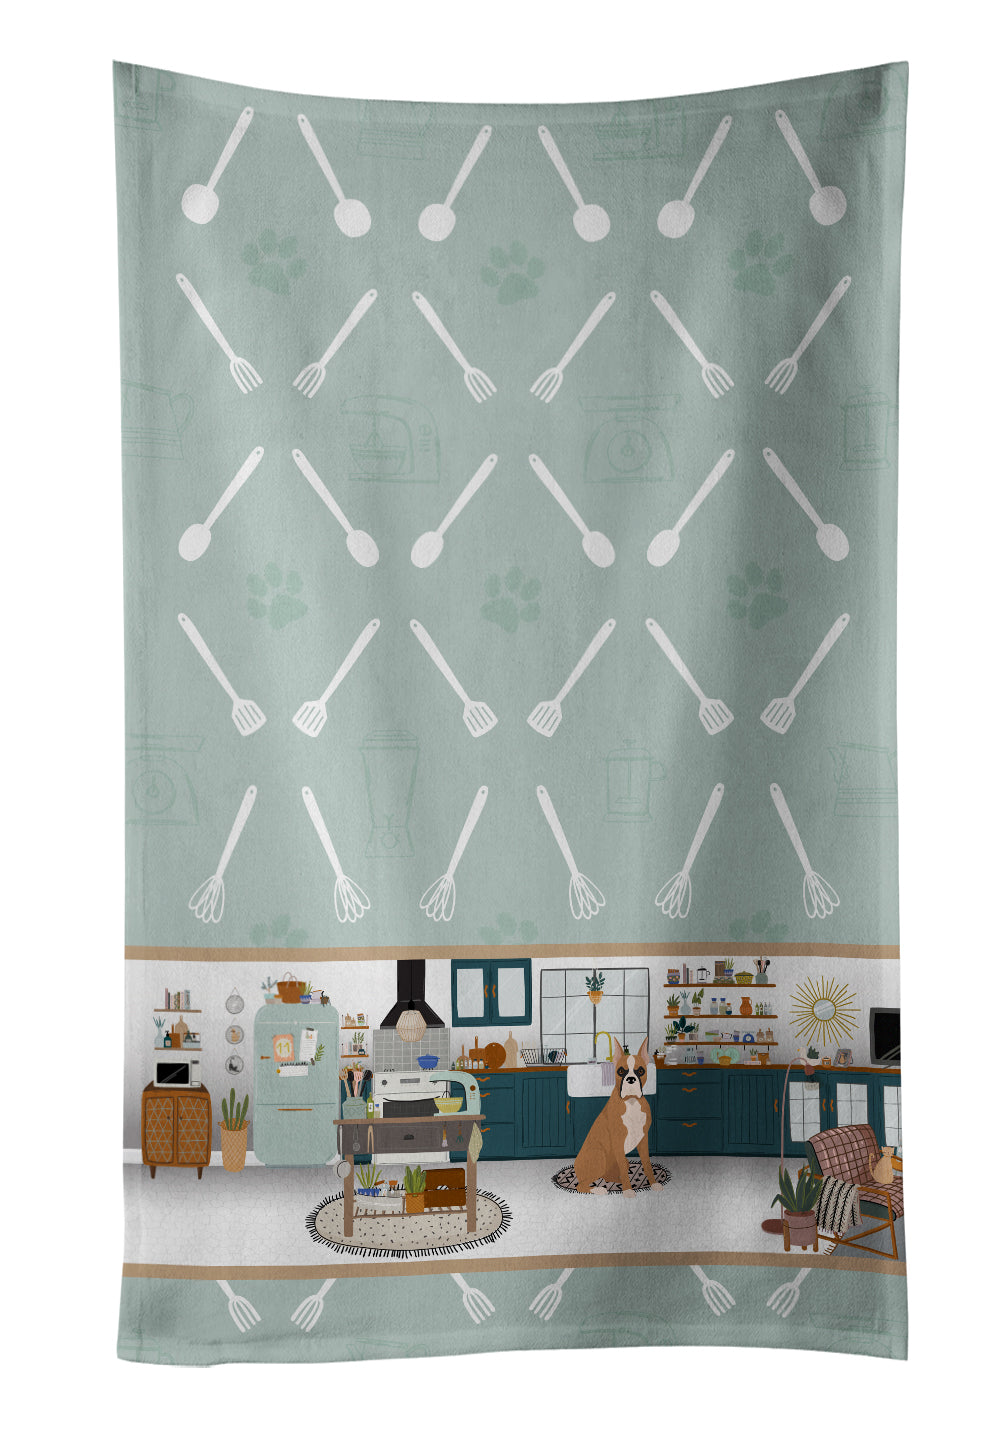 Buy this Fawn Boxer in the Kitchen Kitchen Towel